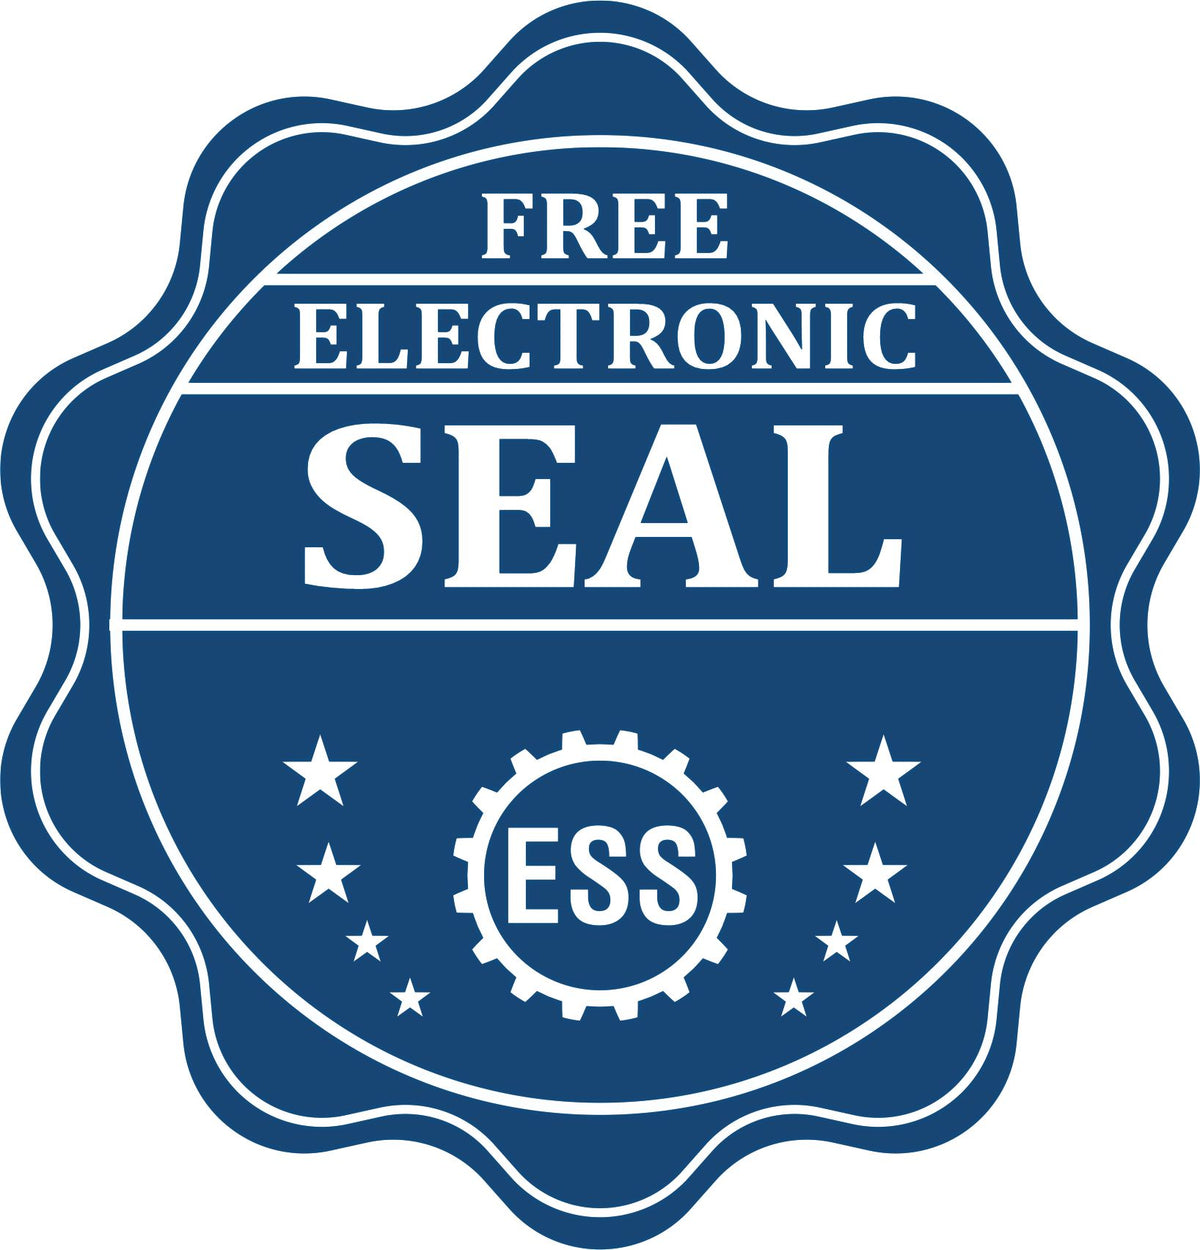 A badge showing a free electronic seal for the Slim Pre-Inked Tennessee Architect Seal Stamp with stars and the ESS gear on the emblem.